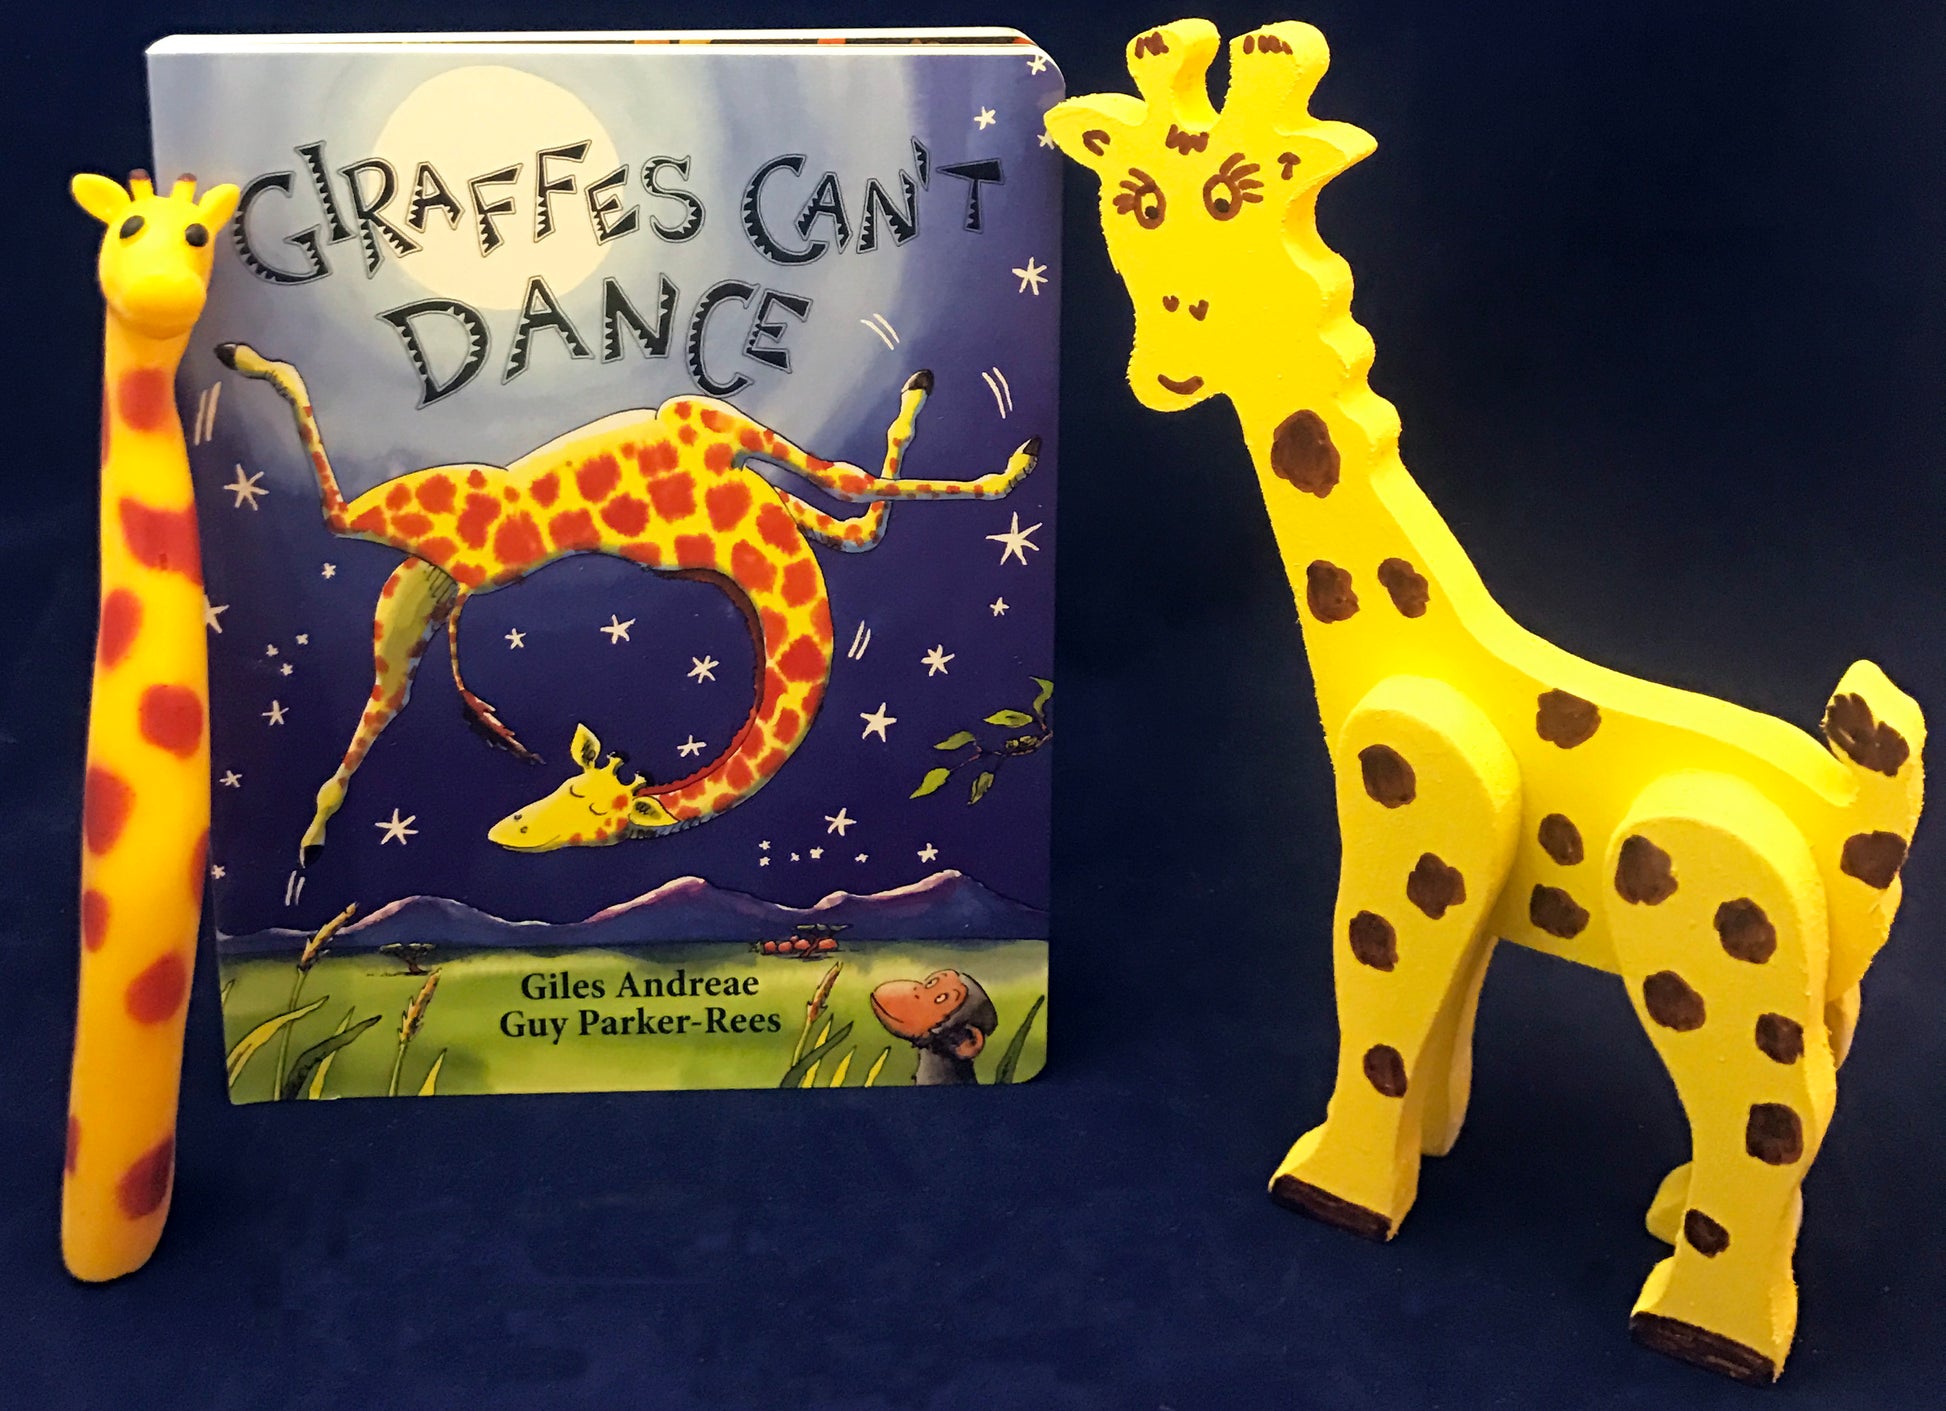 Activities inspired by Giraffe's Can't Dance 